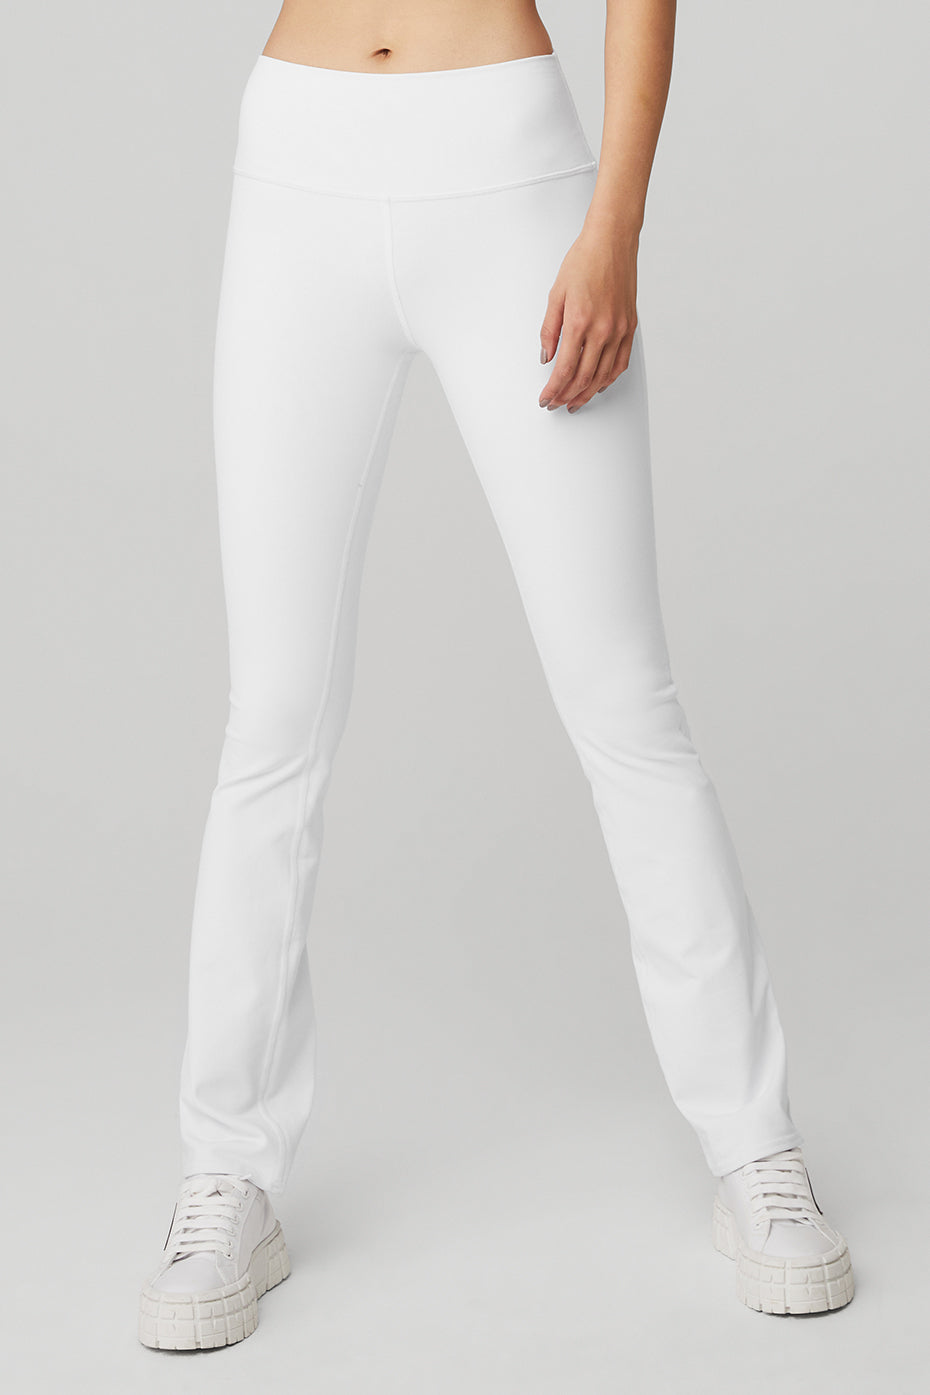 Airbrush High-Waist V Cut 7/8 Bootcut Flared Pant With Side Pocket